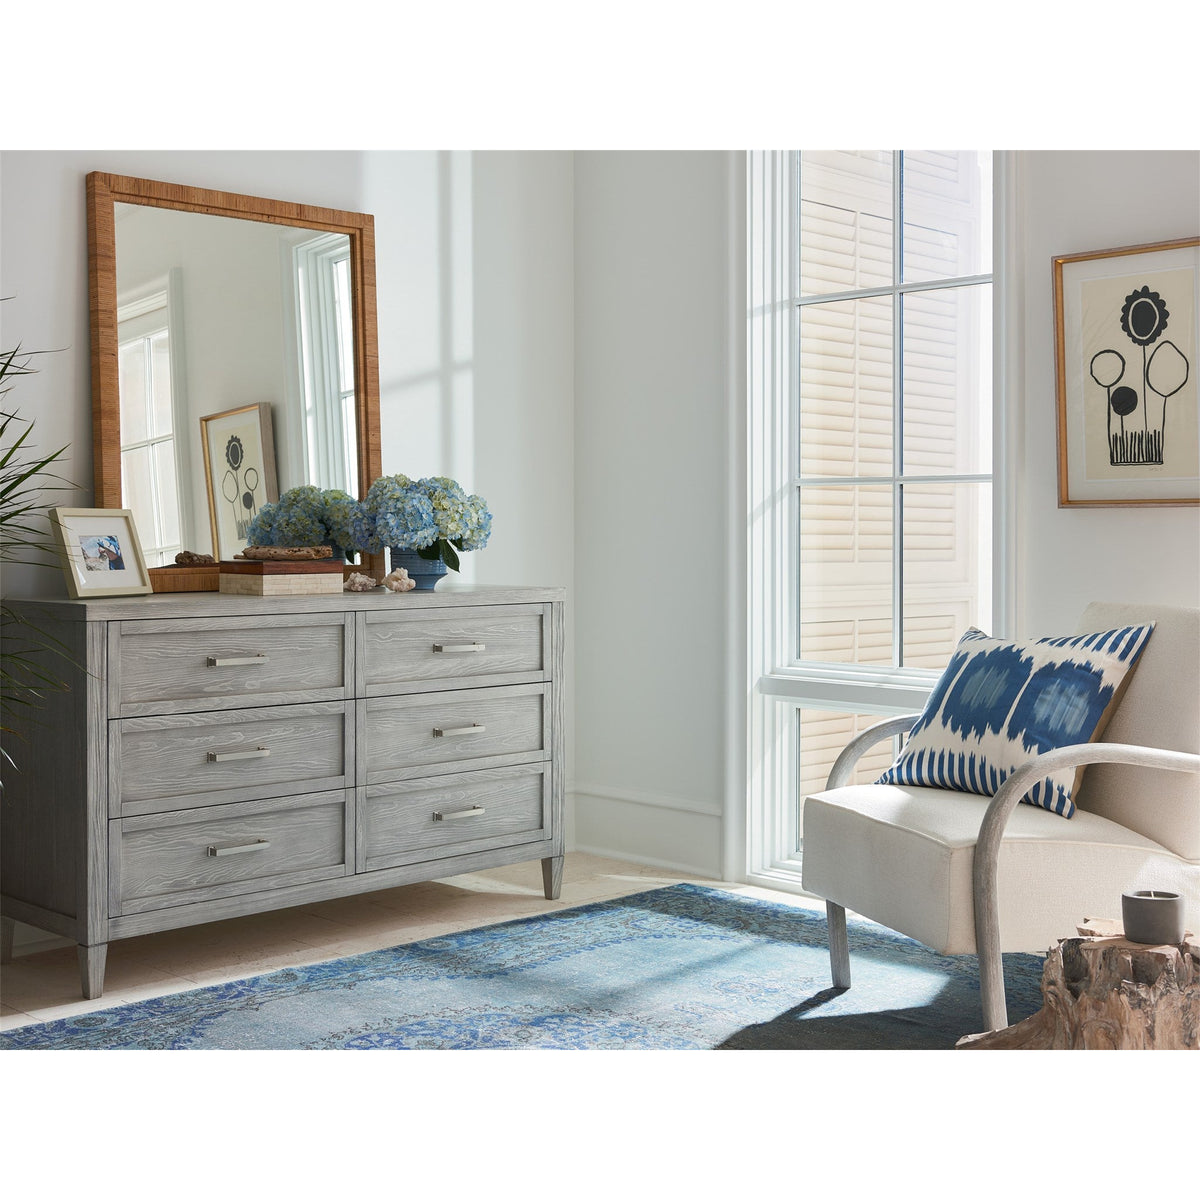 Small Space Dresser - Be Bold Furniture